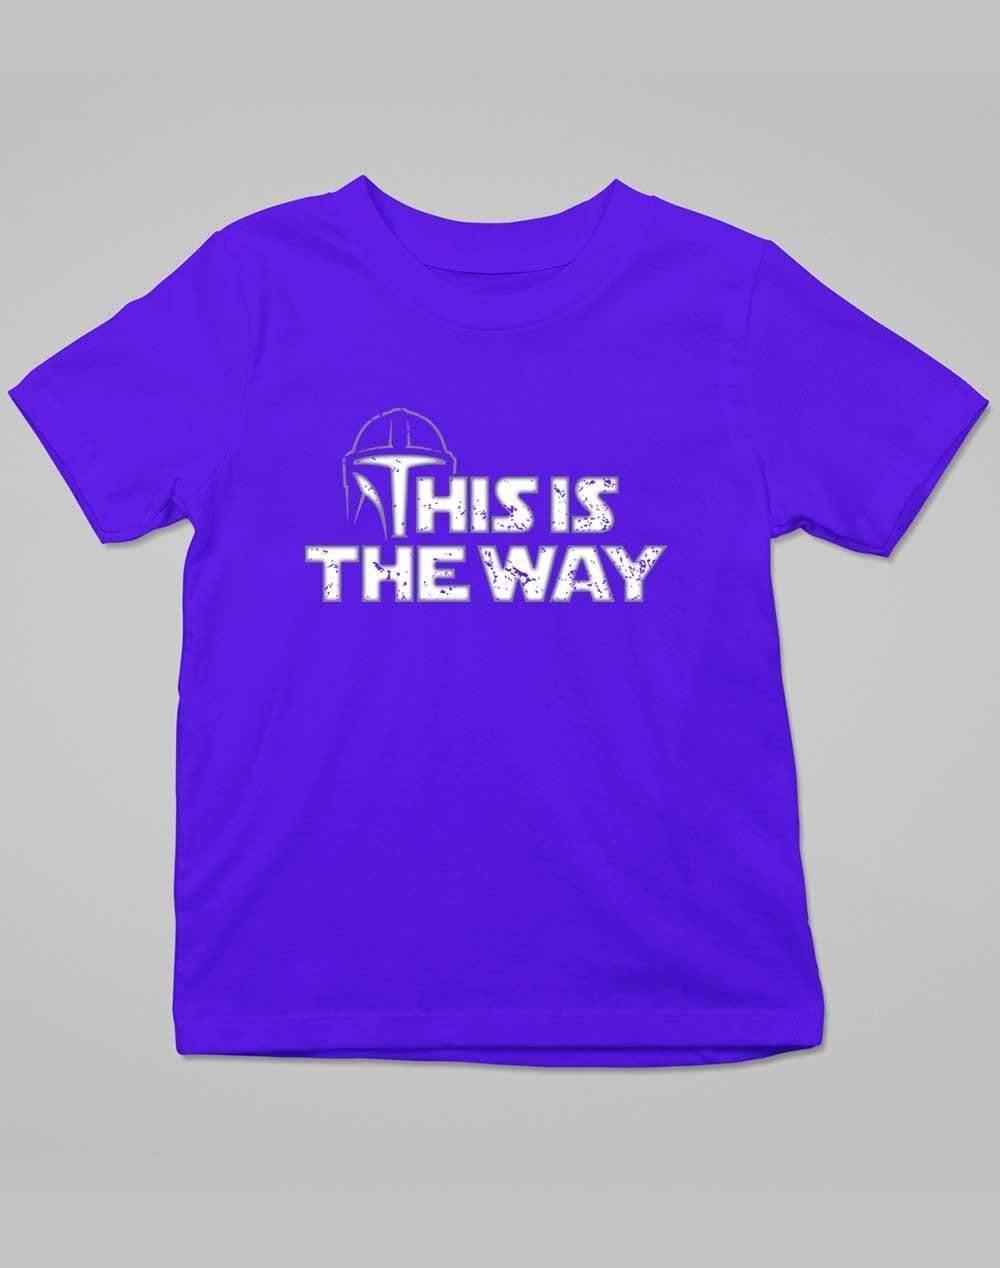 This is the Way - Kids T-Shirt 3-4 years / Royal Blue  - Off World Tees